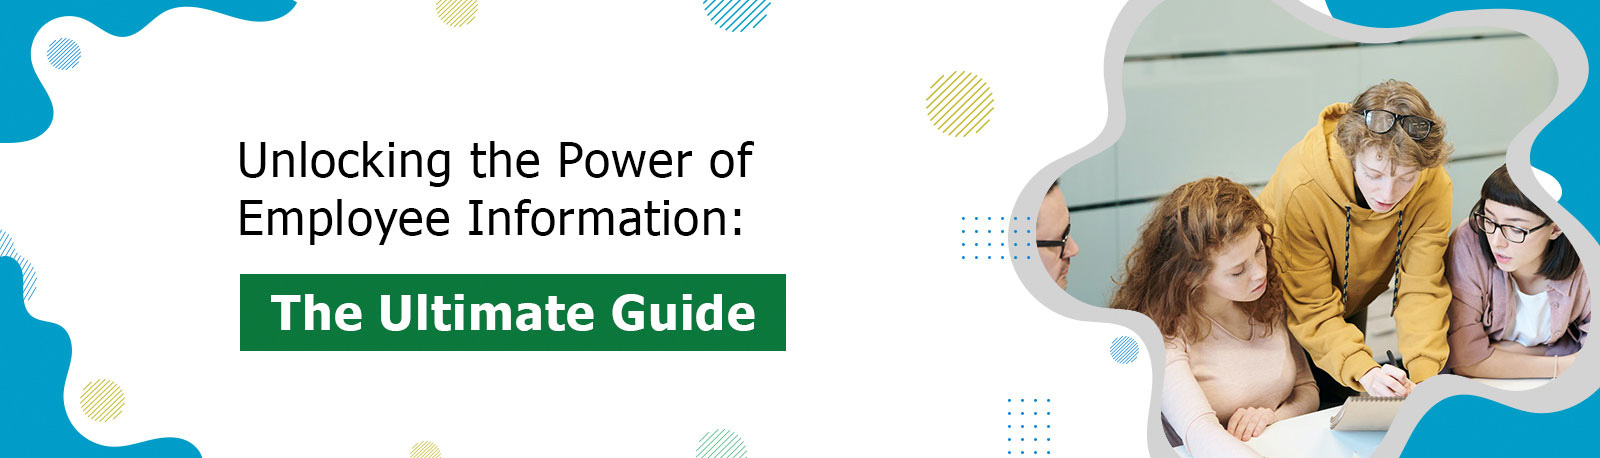 Unlocking the Power of Employee Information: The Ultimate Guide